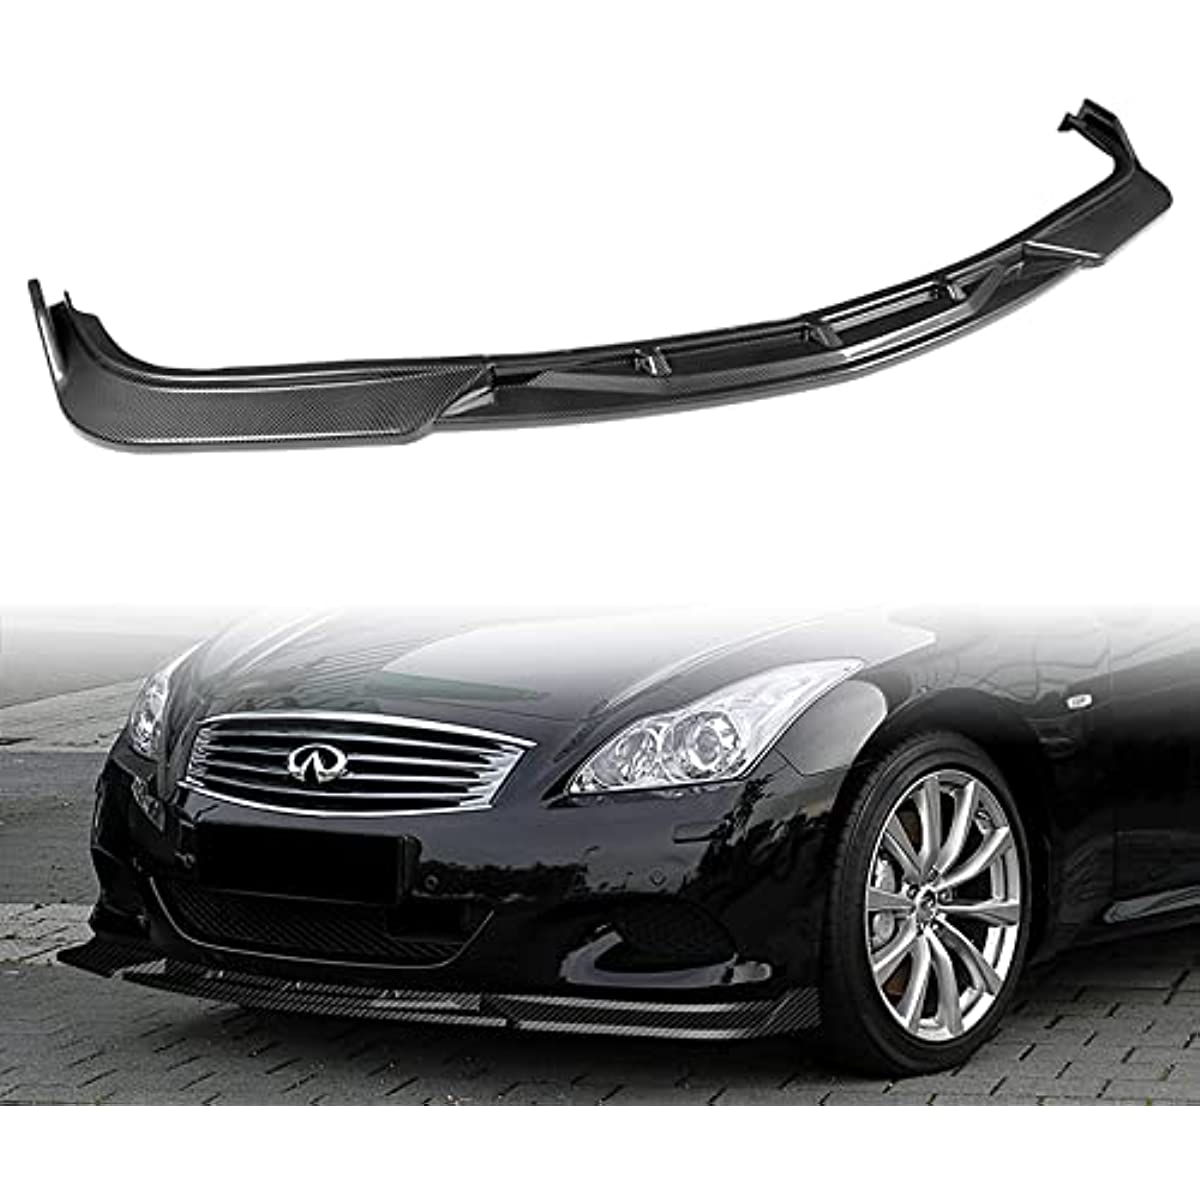 2008 - 2013 Infiniti G37 Coupe/2DR Front Lip